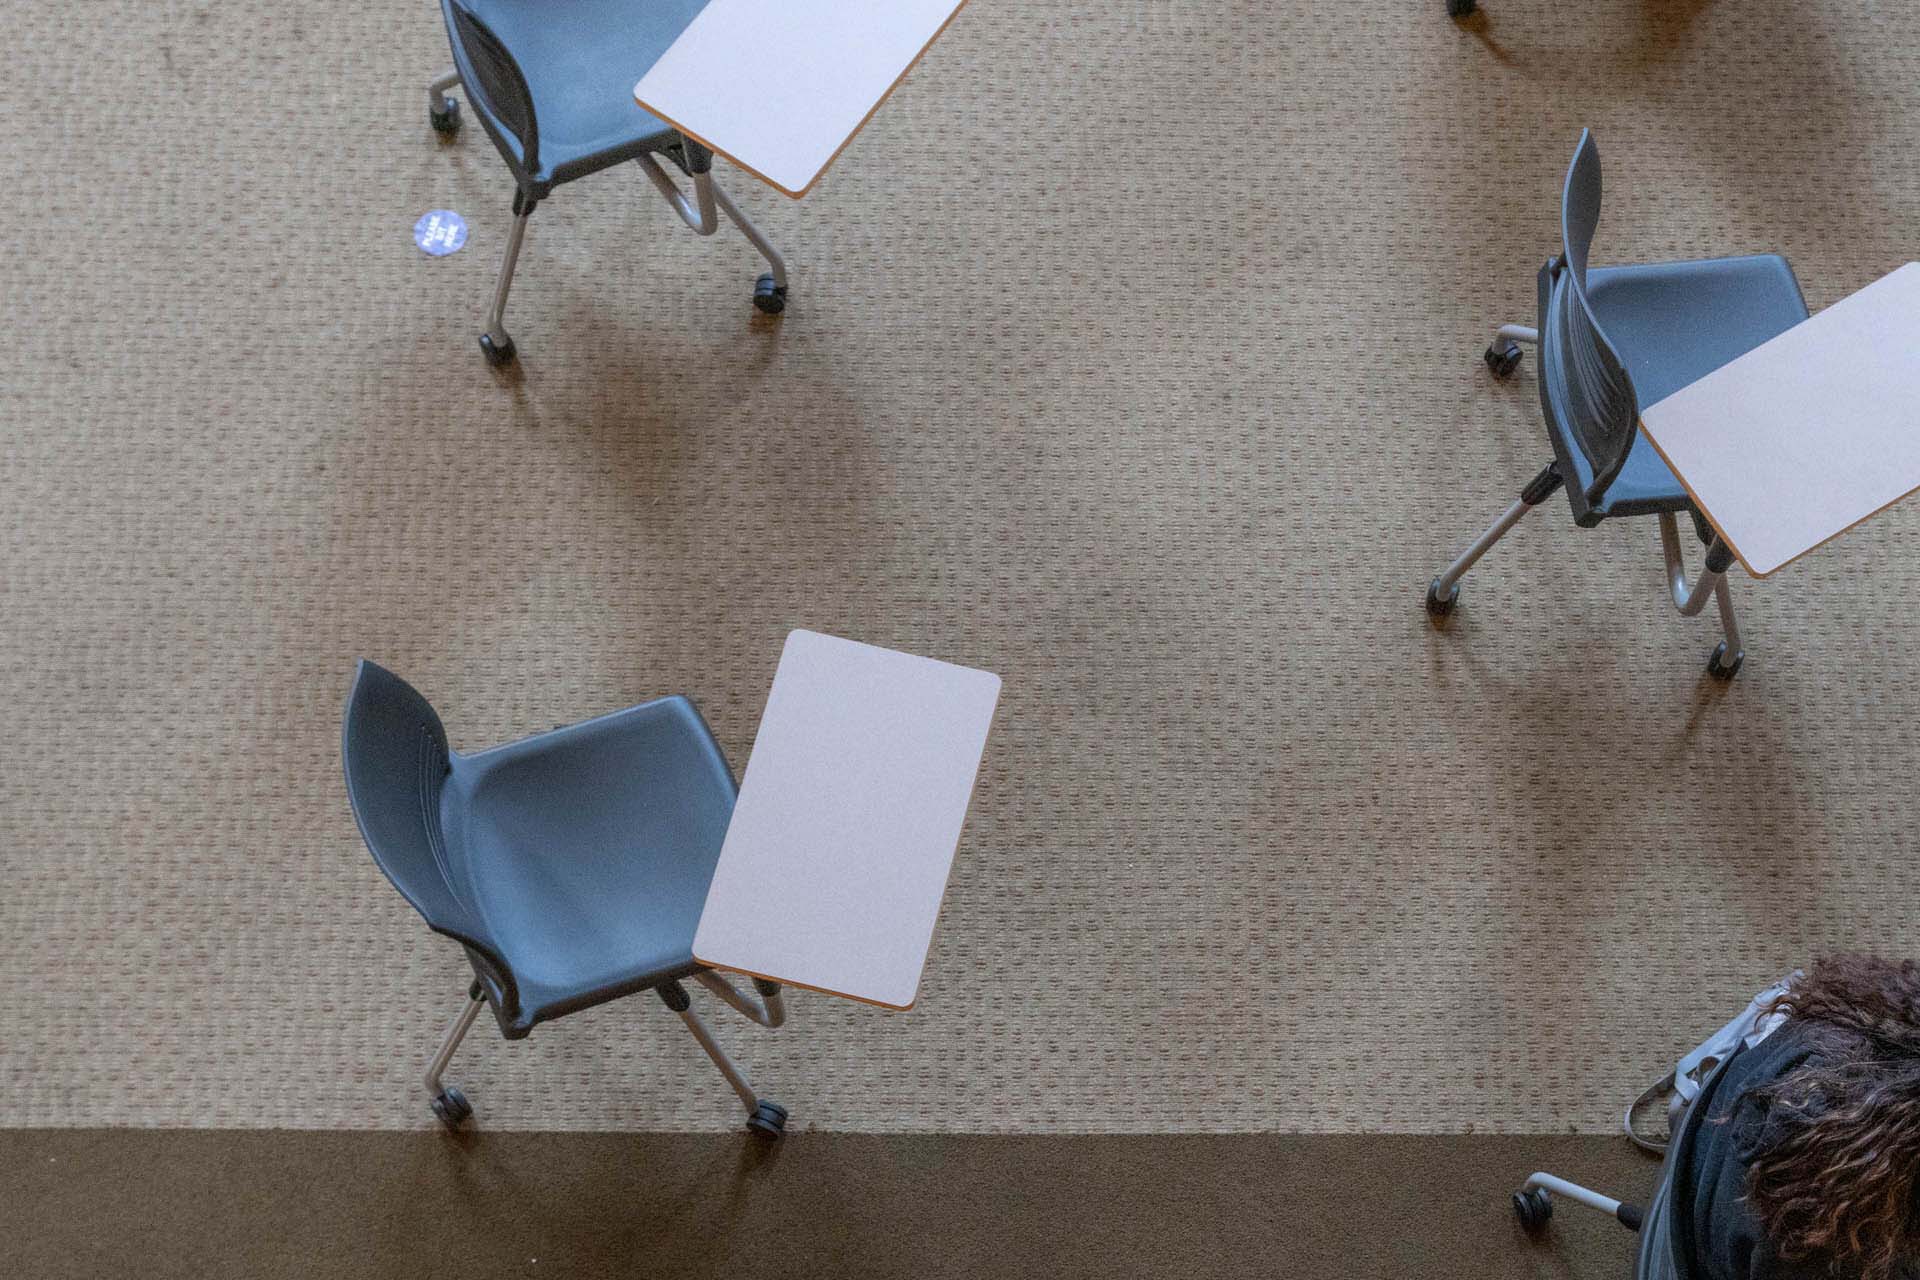 Image of student chairs from above